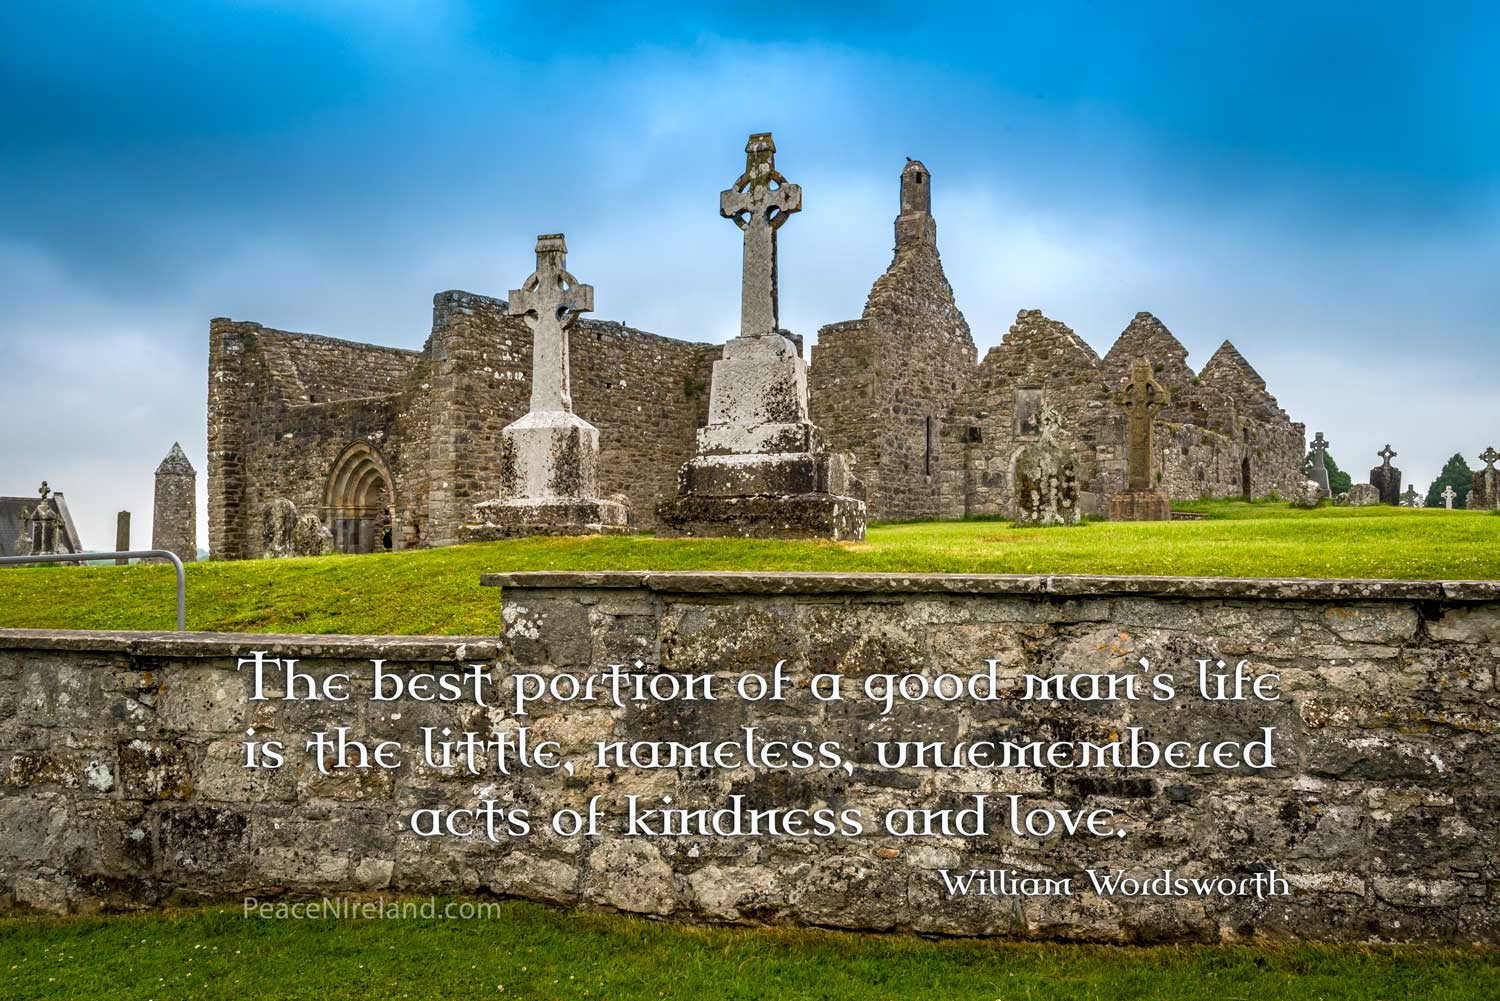 St Patrick's Cross at Clonmacnoise, County Offaly